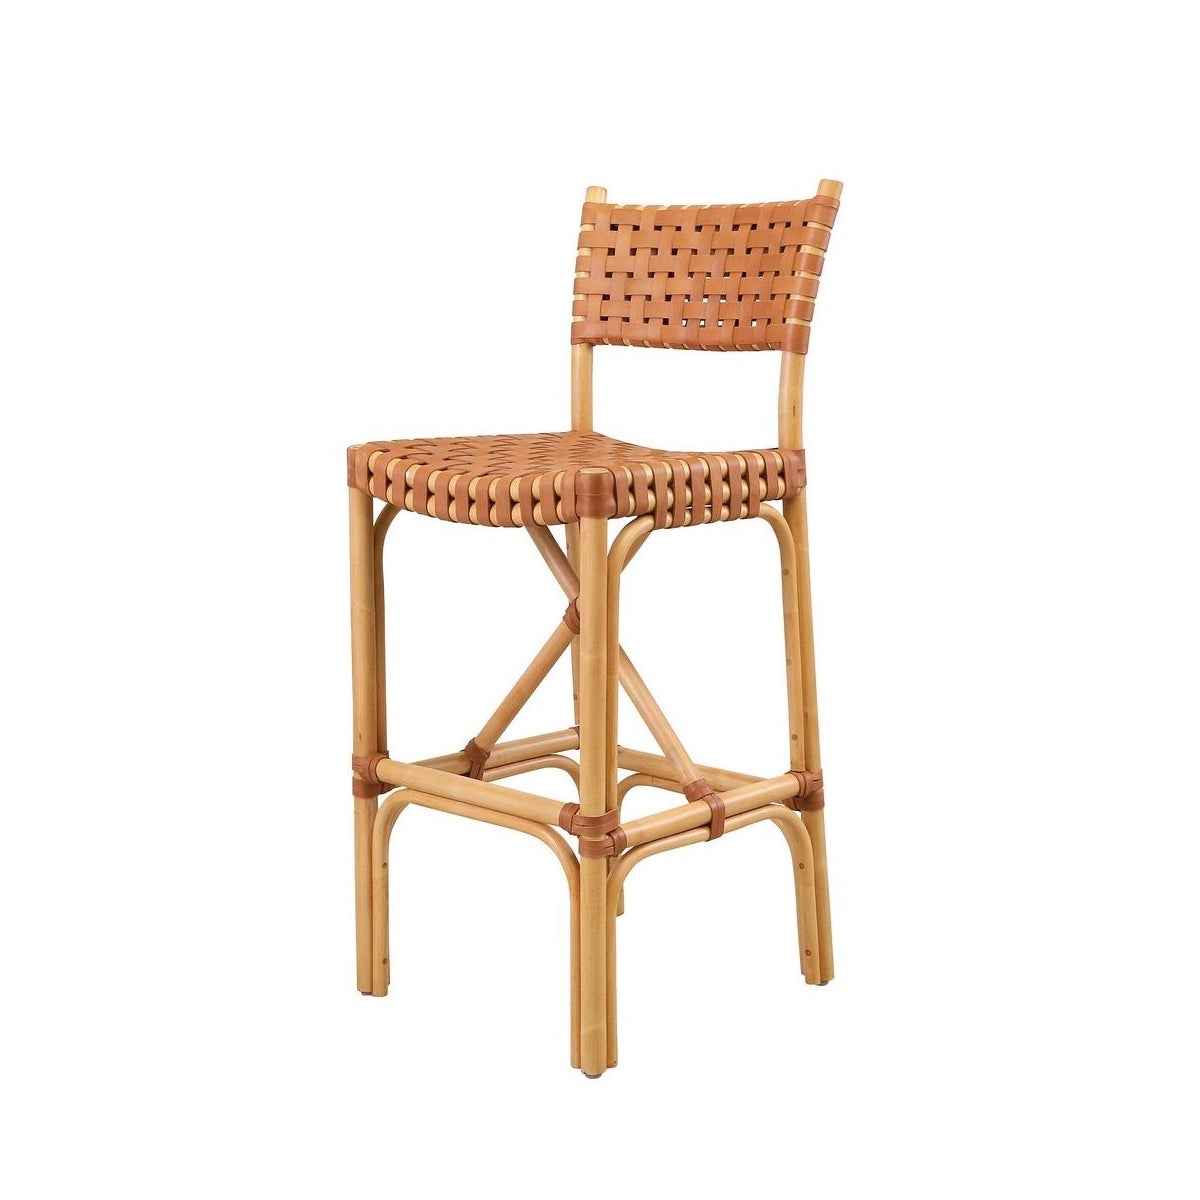 CLOSE-OUT!!Malibu Bar Chair Frame Color - Natural  Leather Color - Brown 50% OFF!This Item Wil